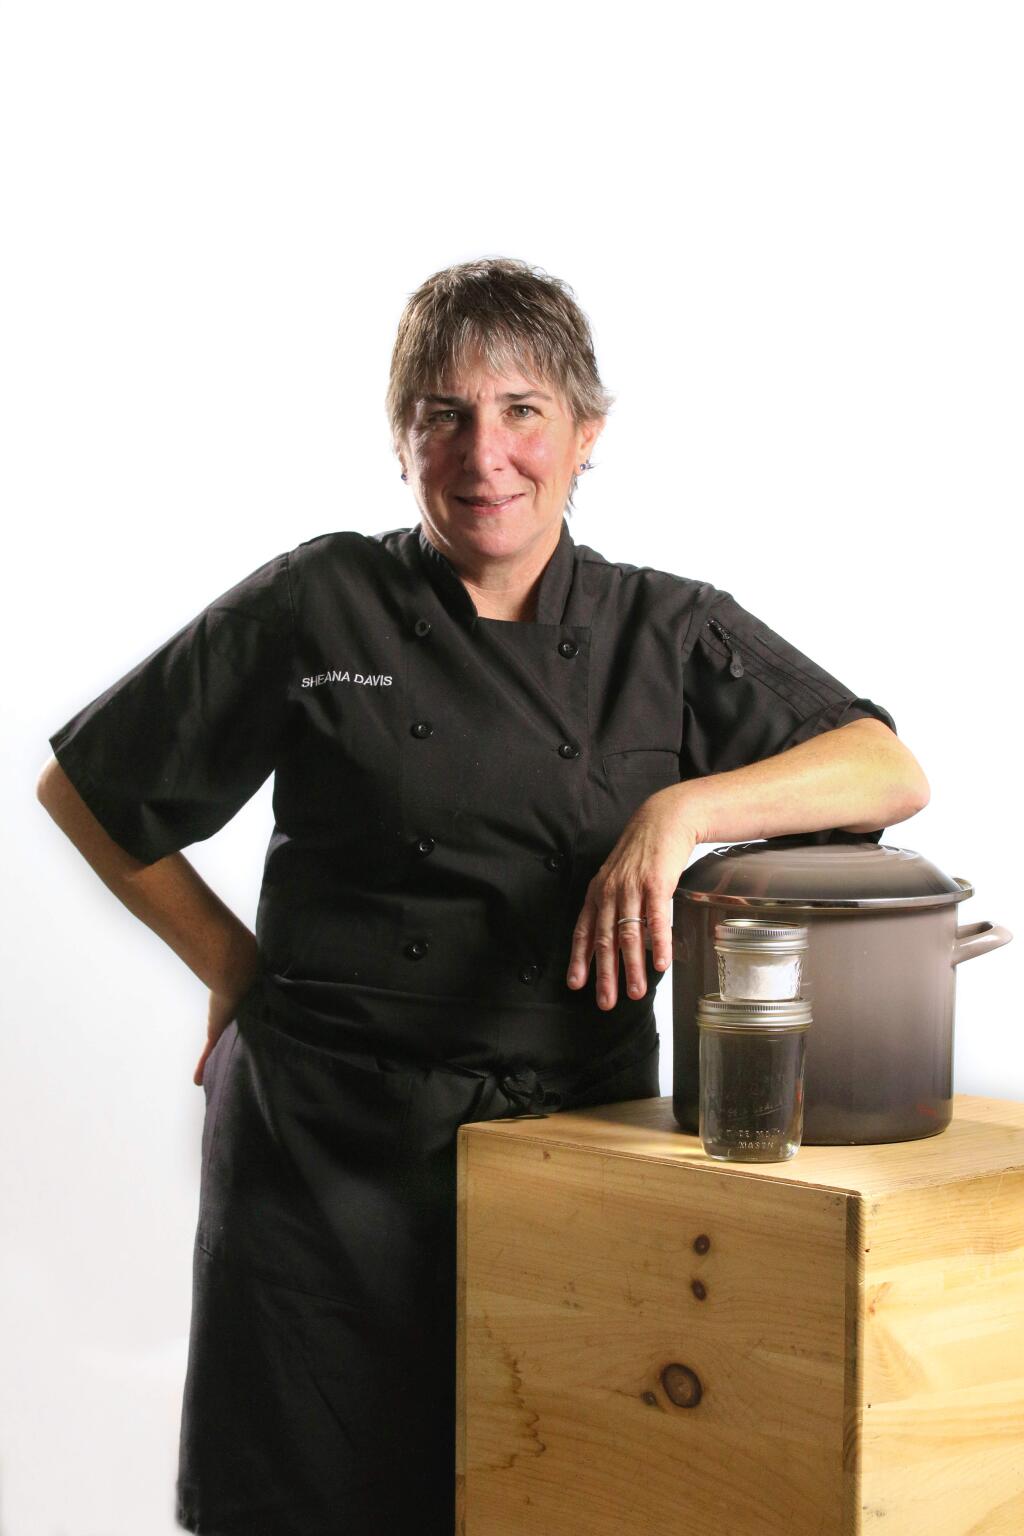 Sheana Davis is chef, caterer and cheesemaker at The Epicurean Connection in Sonoma. (Jeff Quackenbush / North Bay Business Journal) Aug. 26, 2019